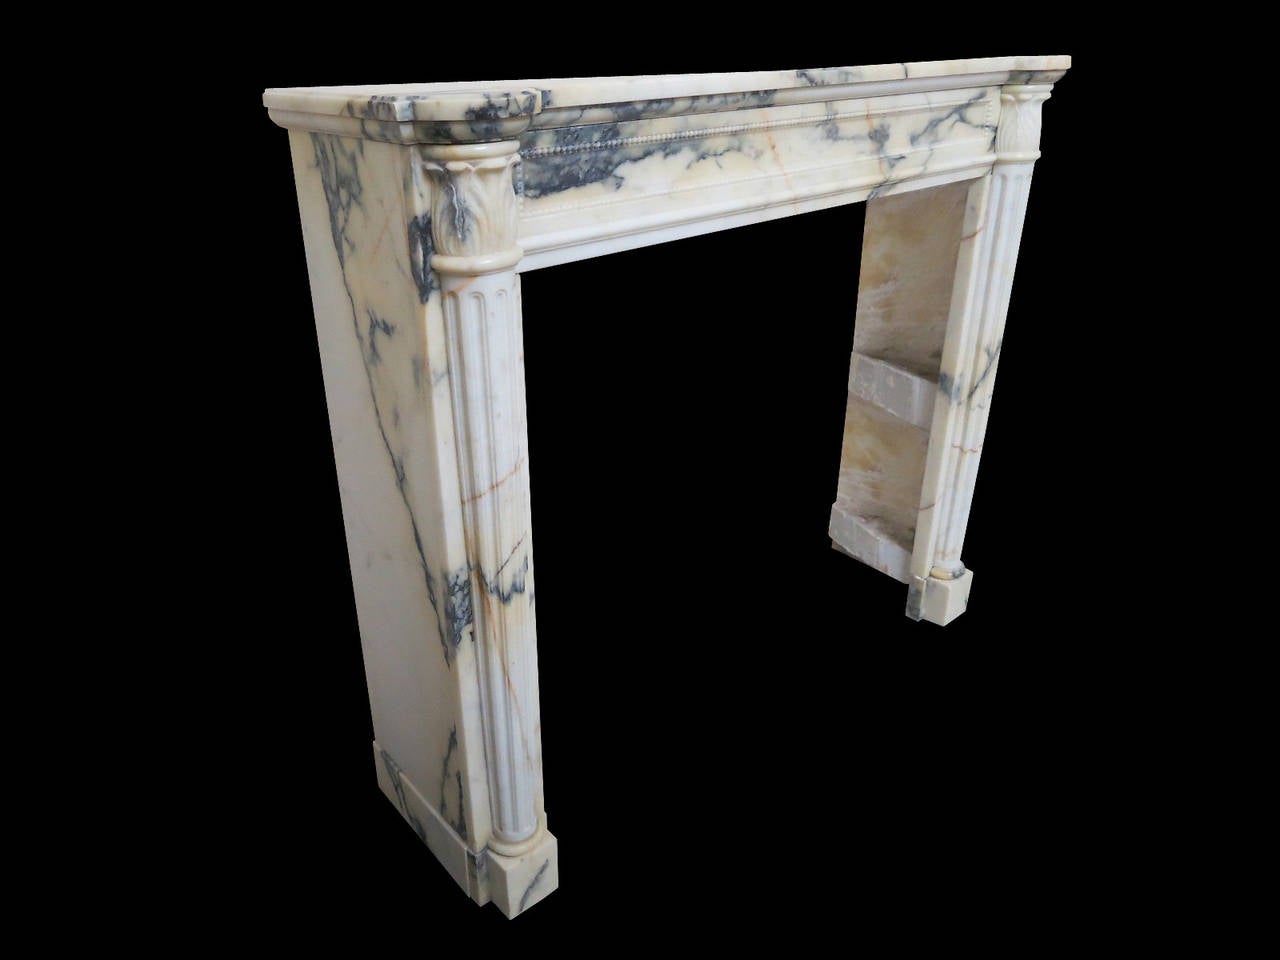 A fine quality 19th century French mantel in the Louis XVI manner, carved in rare and richly veined and colored Italian Panazeau marble. The jambs of tapering fluted columns surmounted by carved Acanthus leaf. The frieze with a fielded beaded panel